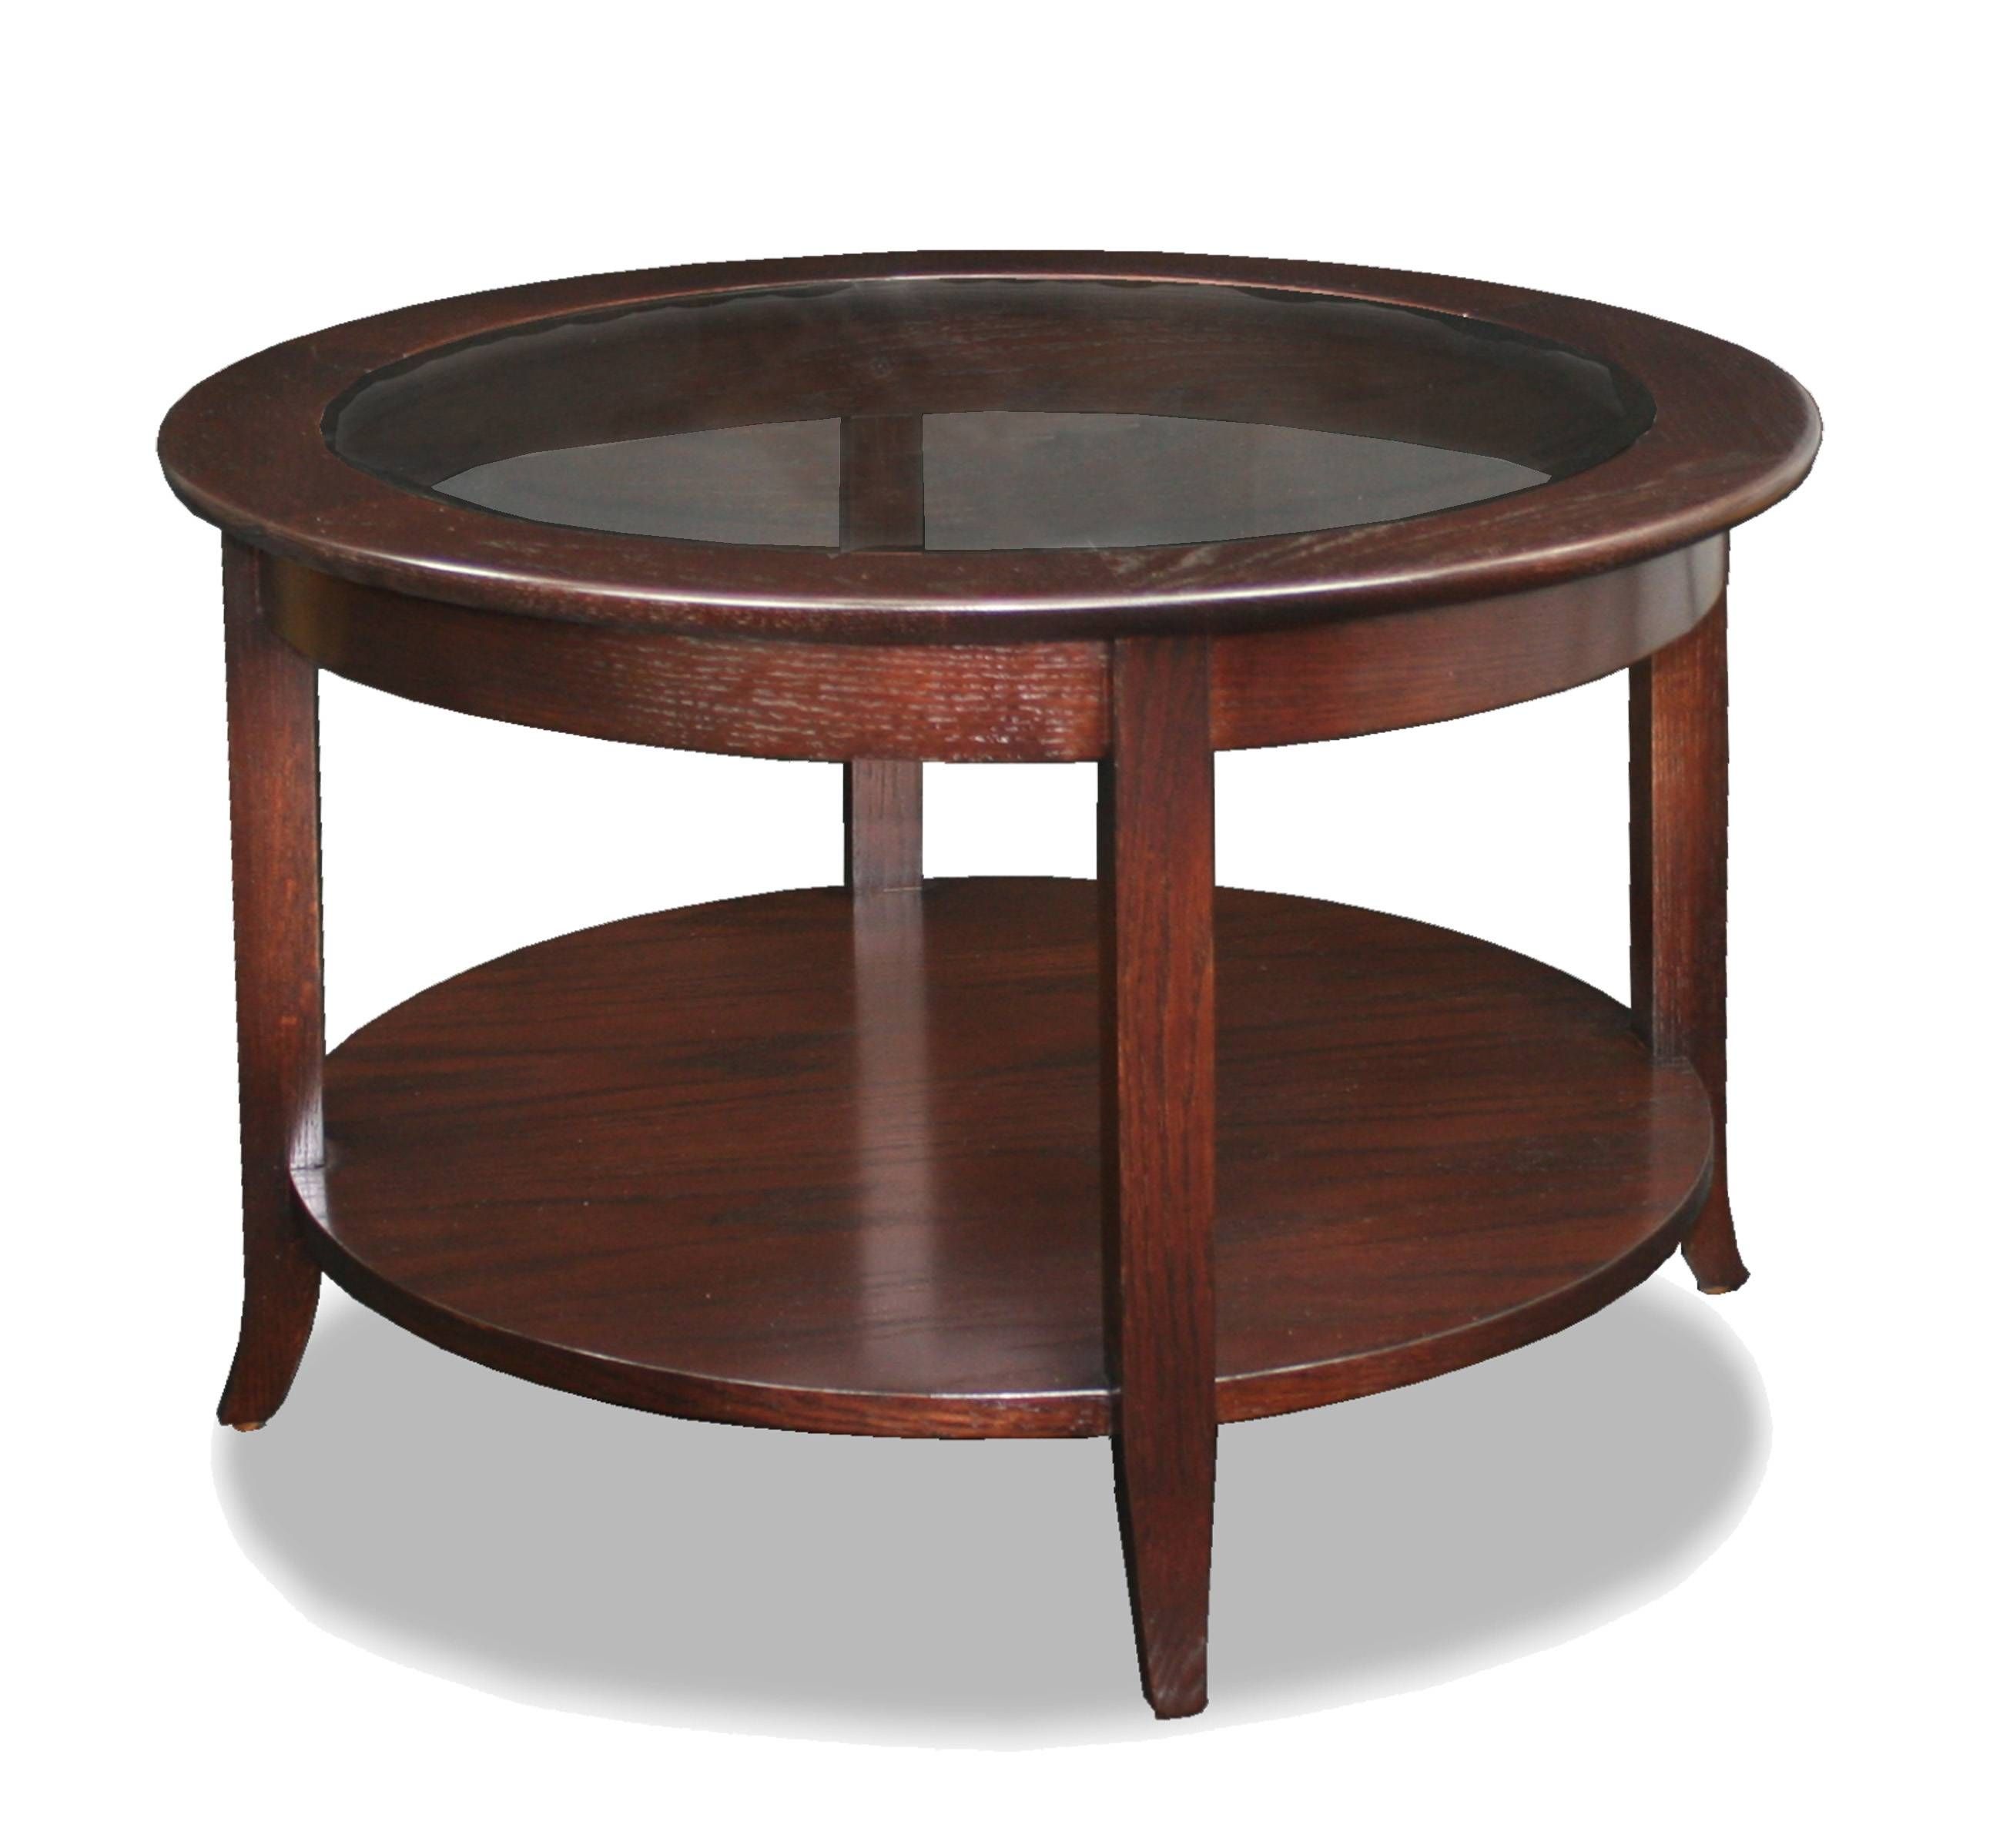 Coffee Table: Astounding Round Coffee Tables Uk Oak Coffee Tables With Regard To Small Circle Coffee Tables (View 6 of 30)